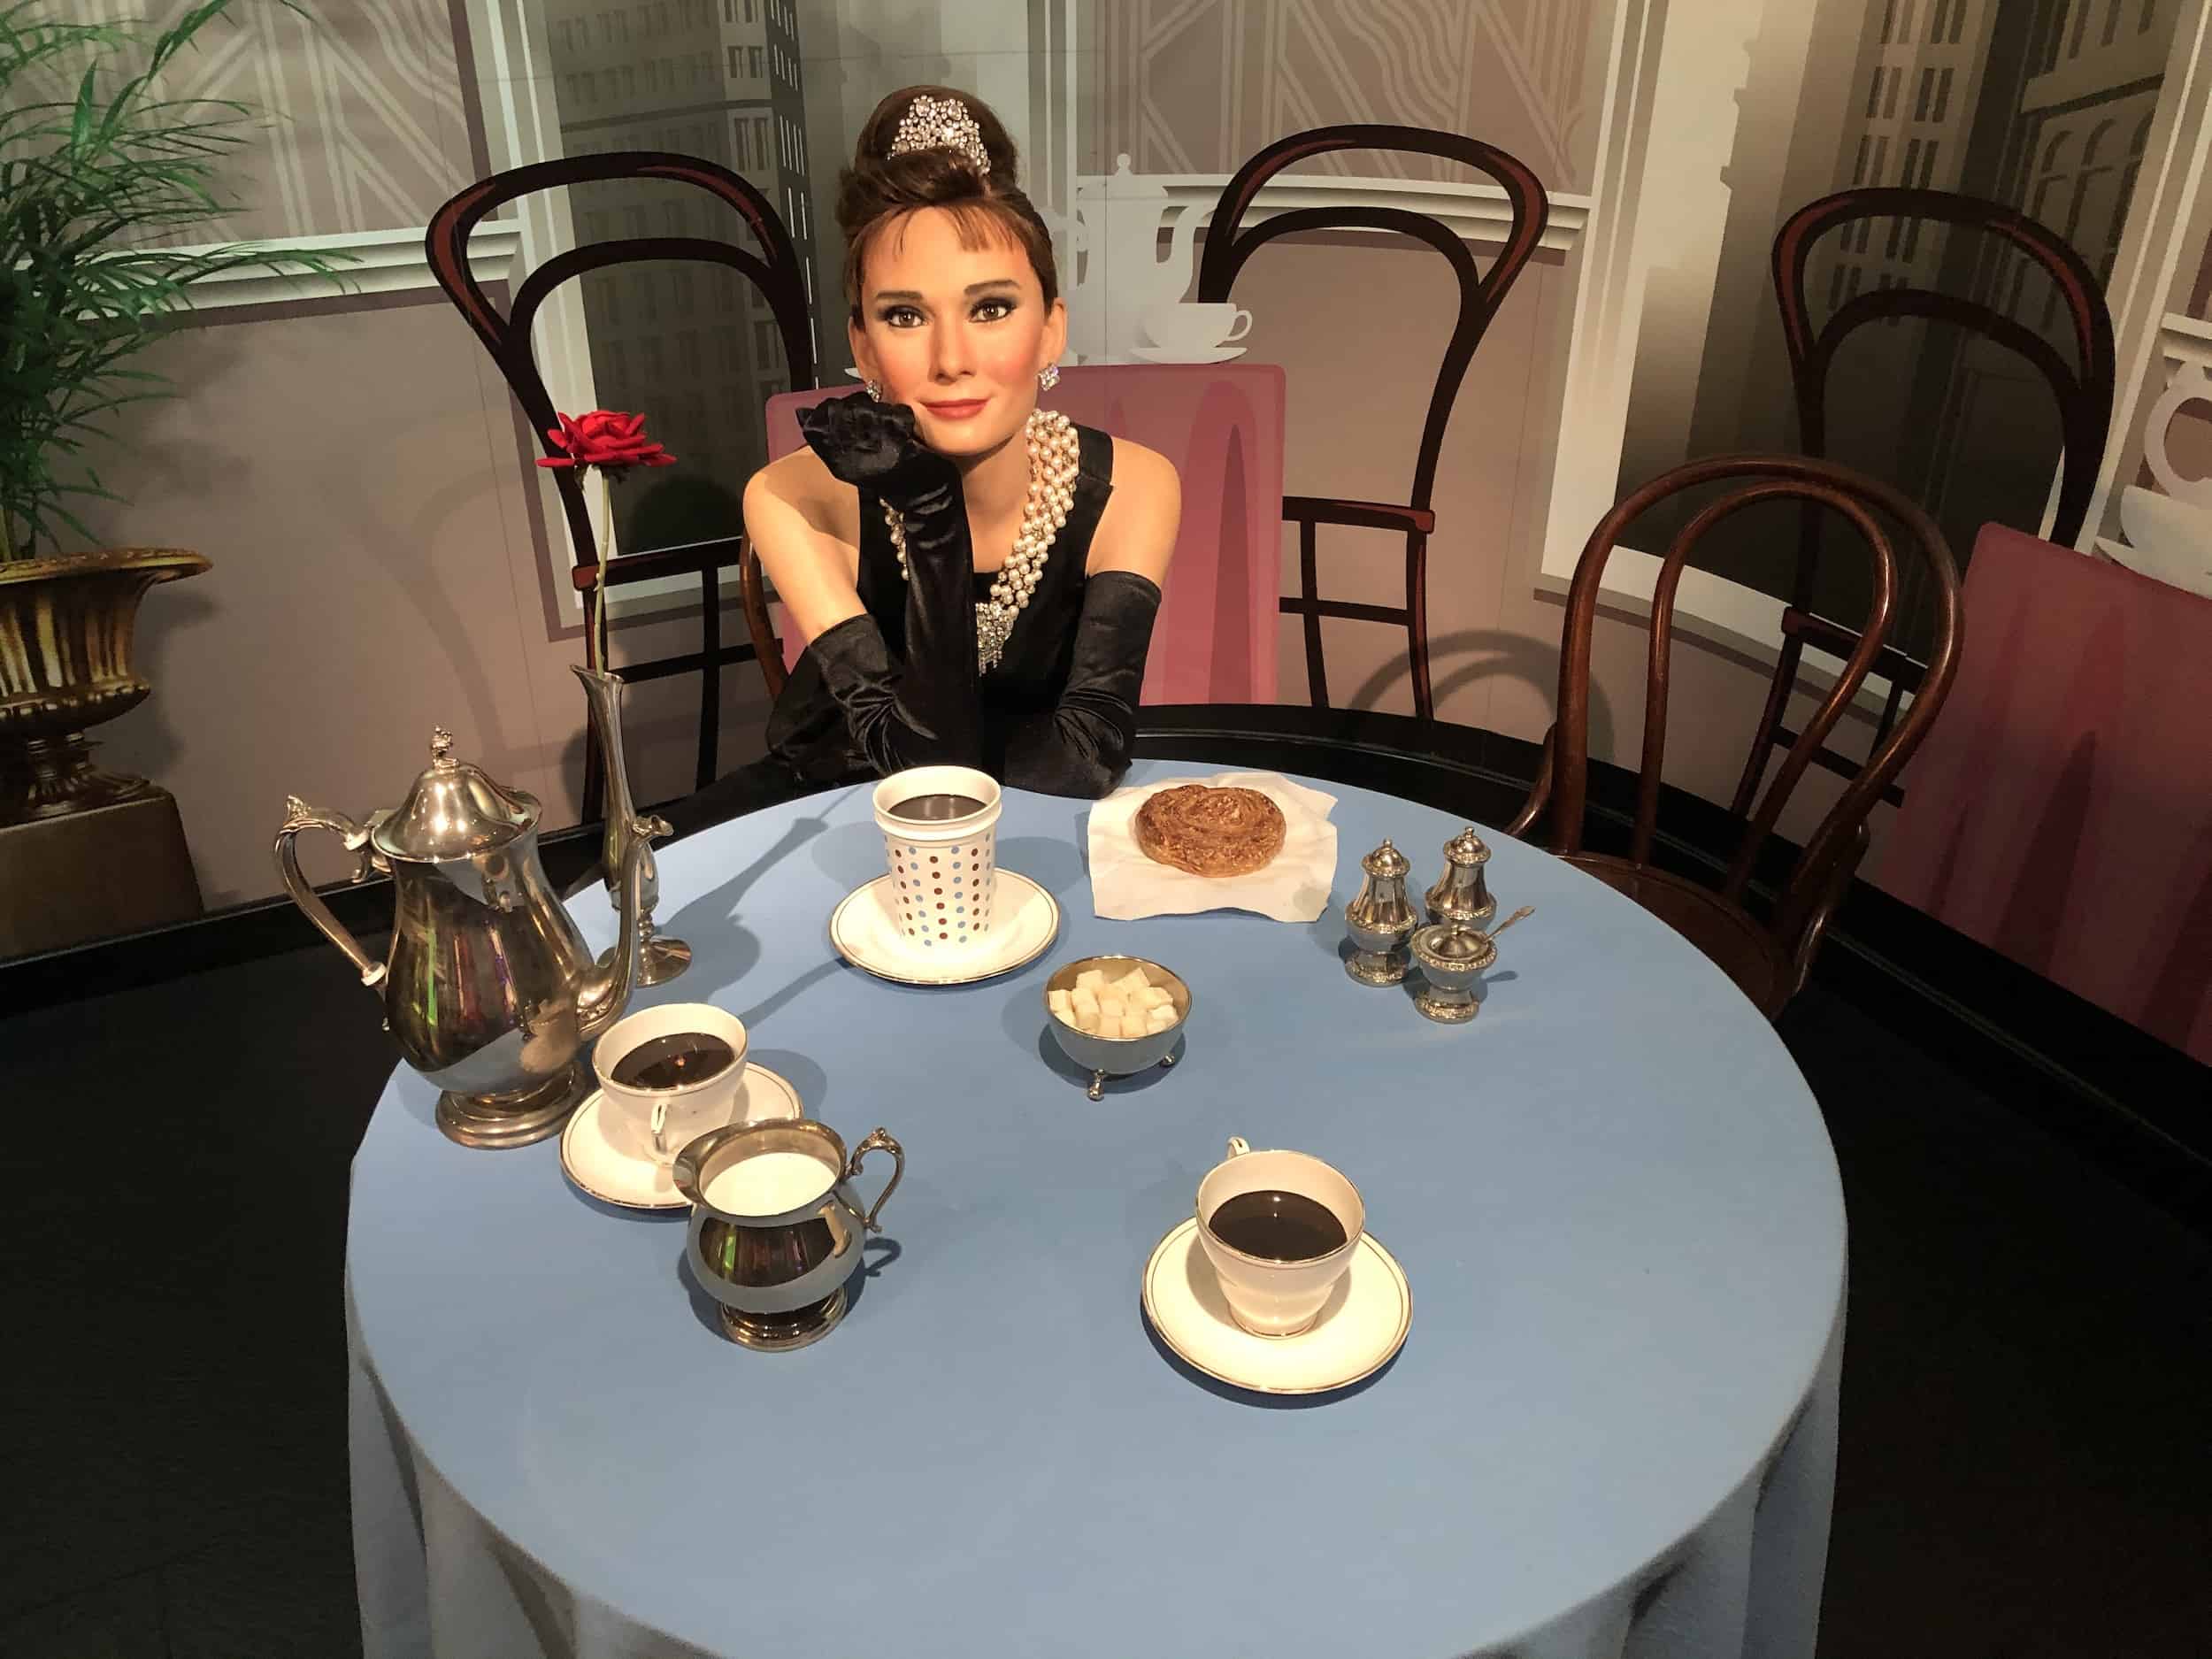 Audrey Hepburn as Holly Golightly in Breakfast at Tiffany's at Madame Tussauds Istanbul